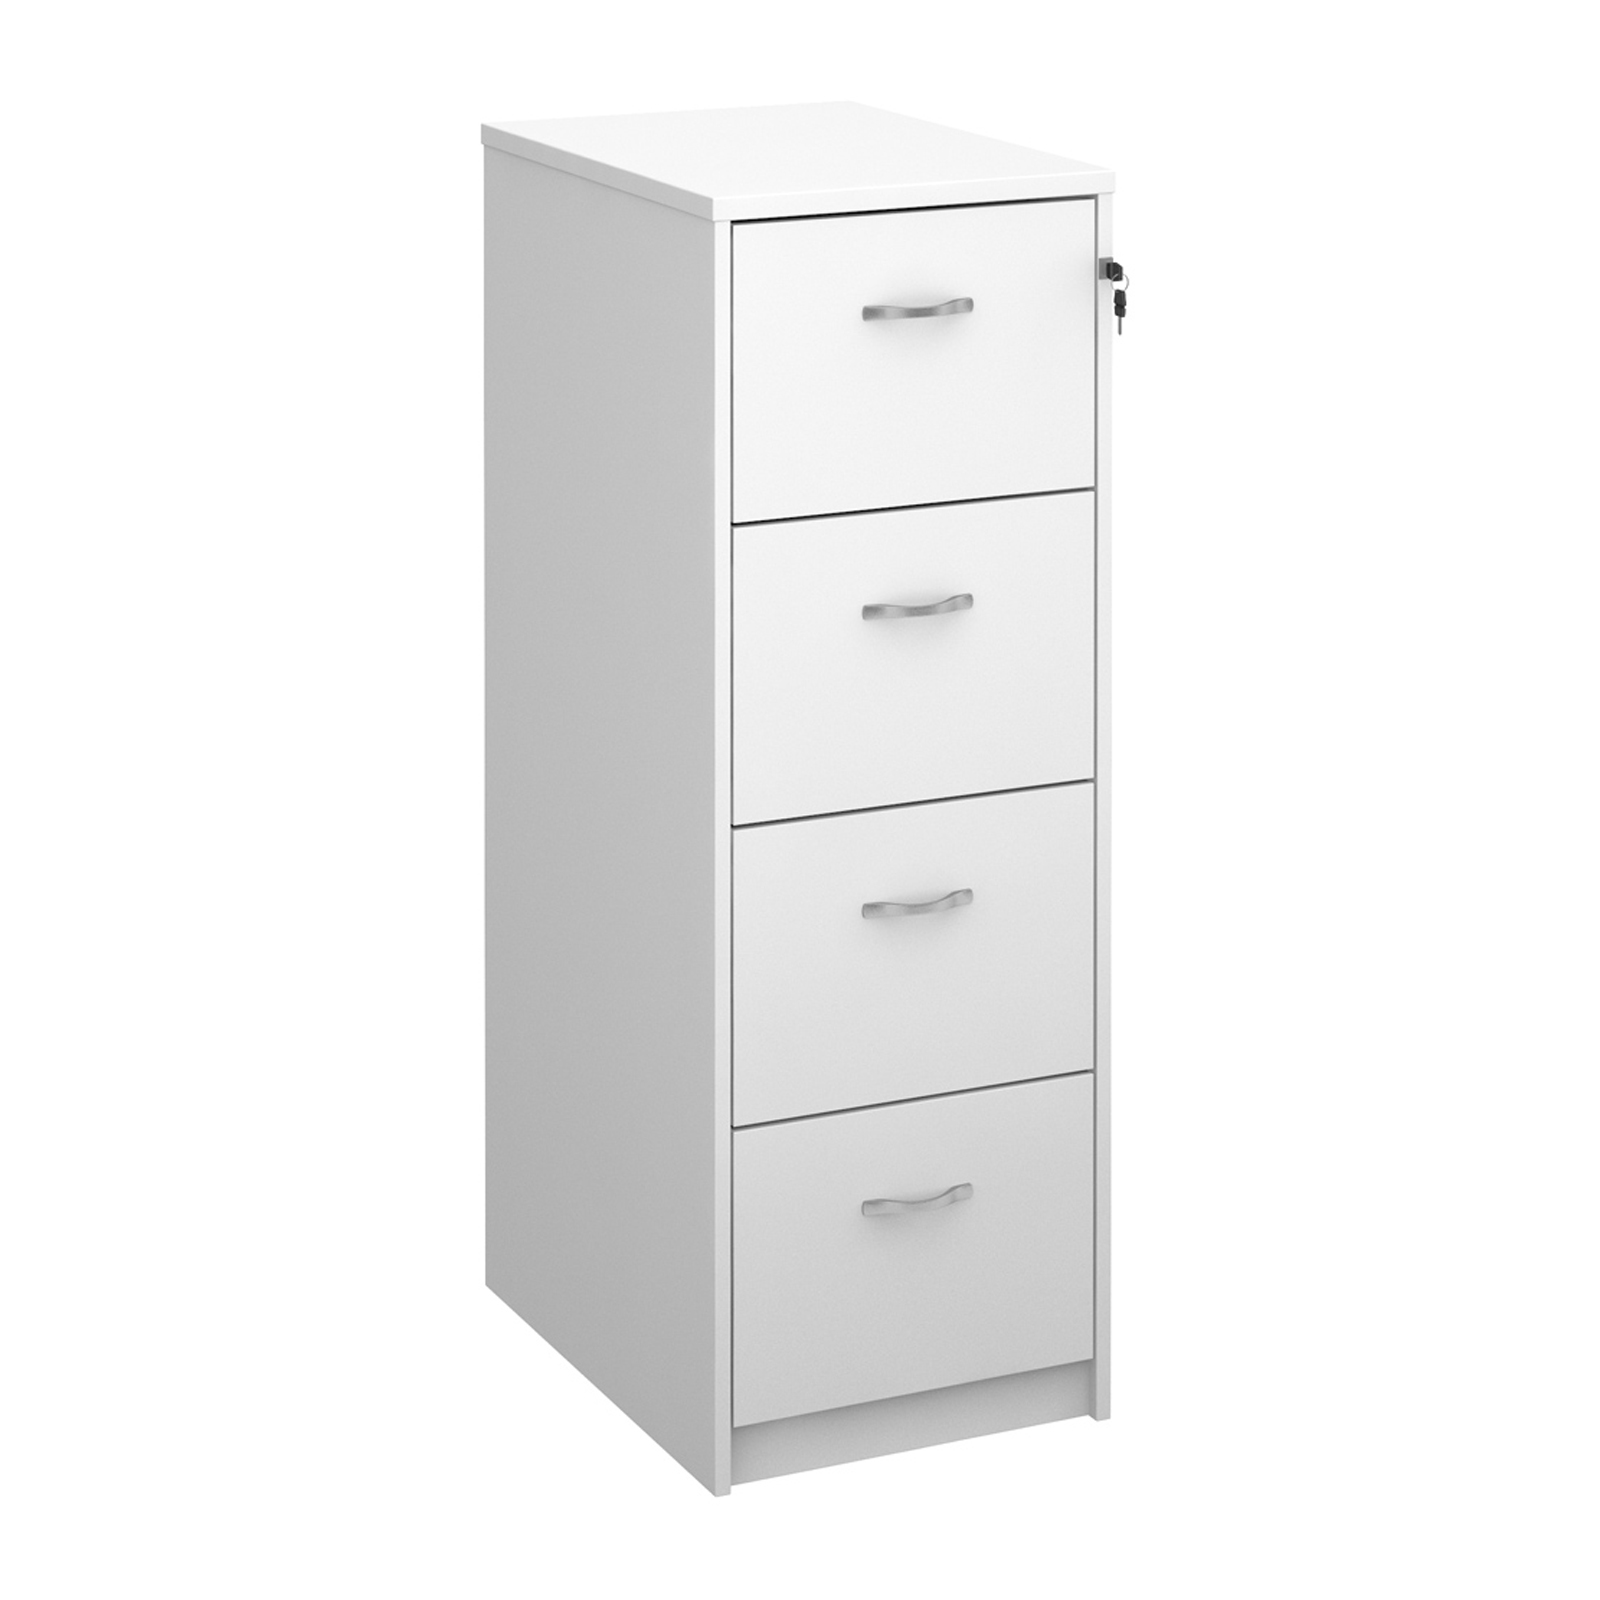 Wood Wooden 4 drawer filing cabinet with silver handles 1360mm high - white